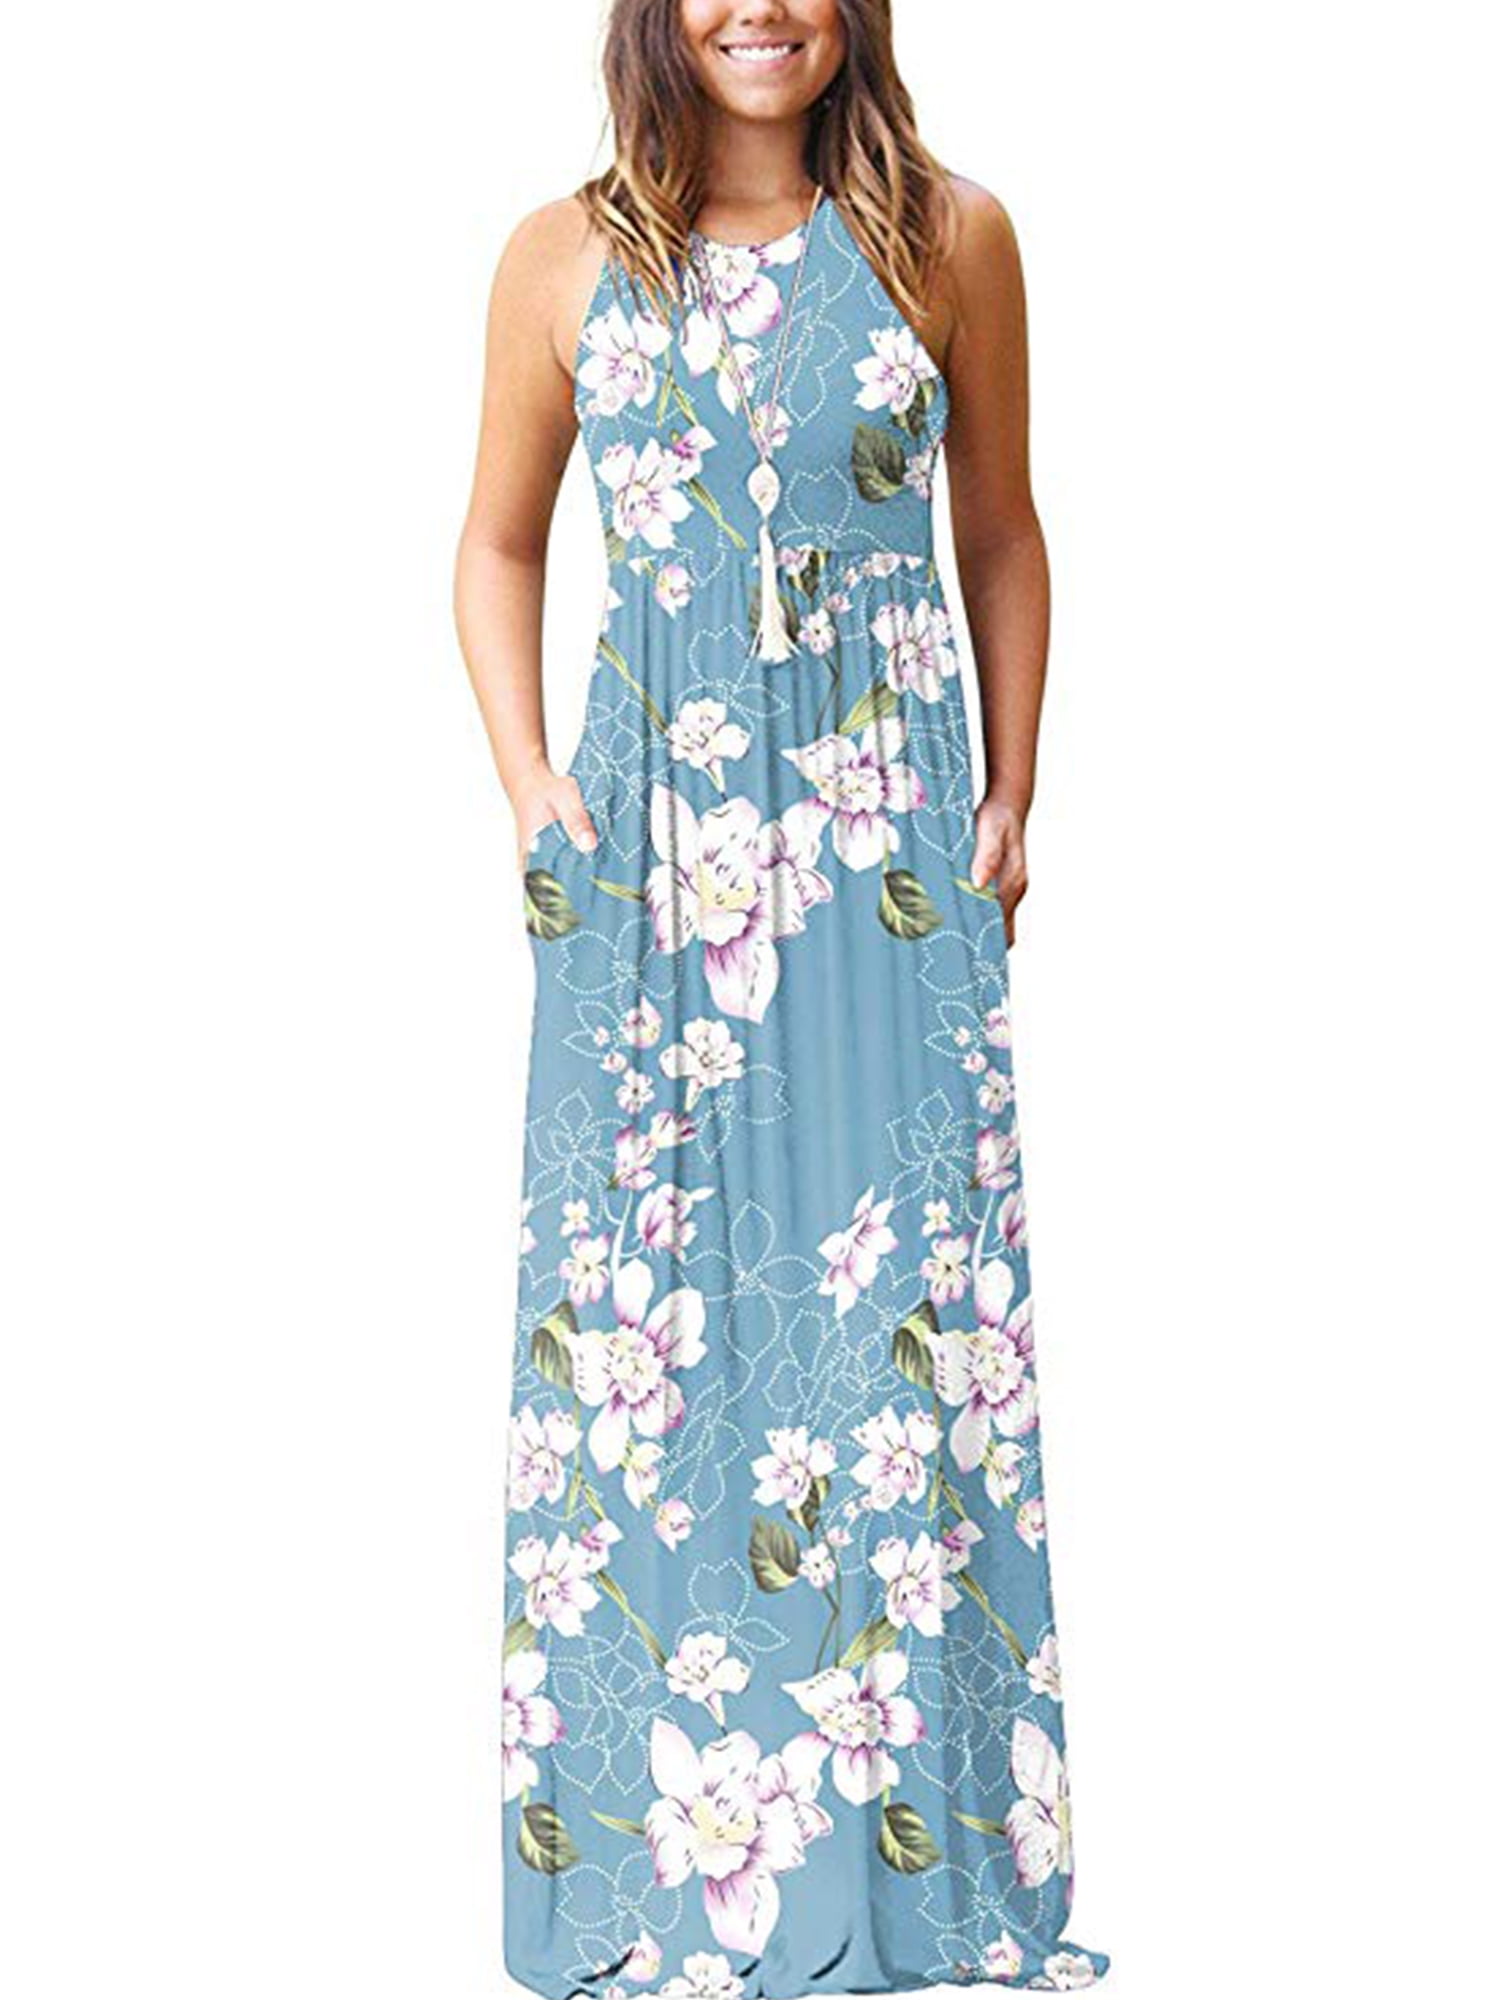 Sexy Dance  Hawaiian Holiday dresses For Women Floral Print Long Maxi